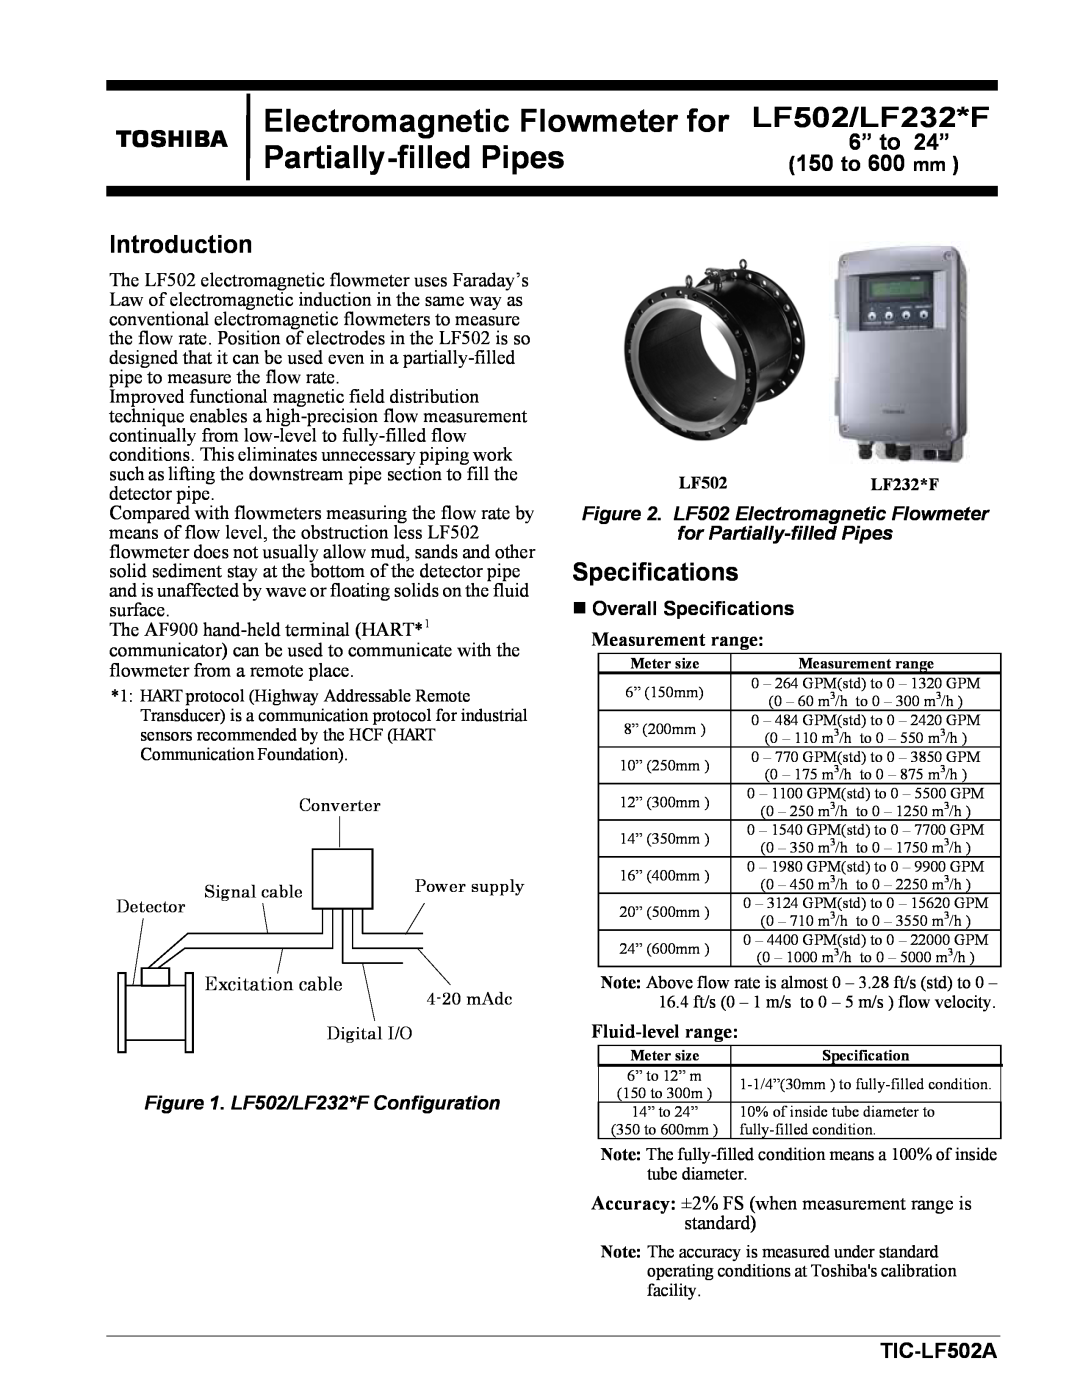 Toshiba LF232*F specifications TIC-LF502A, LF502 Electromagnetic Flowmeter for Partially-filled Pipes, Introduction 